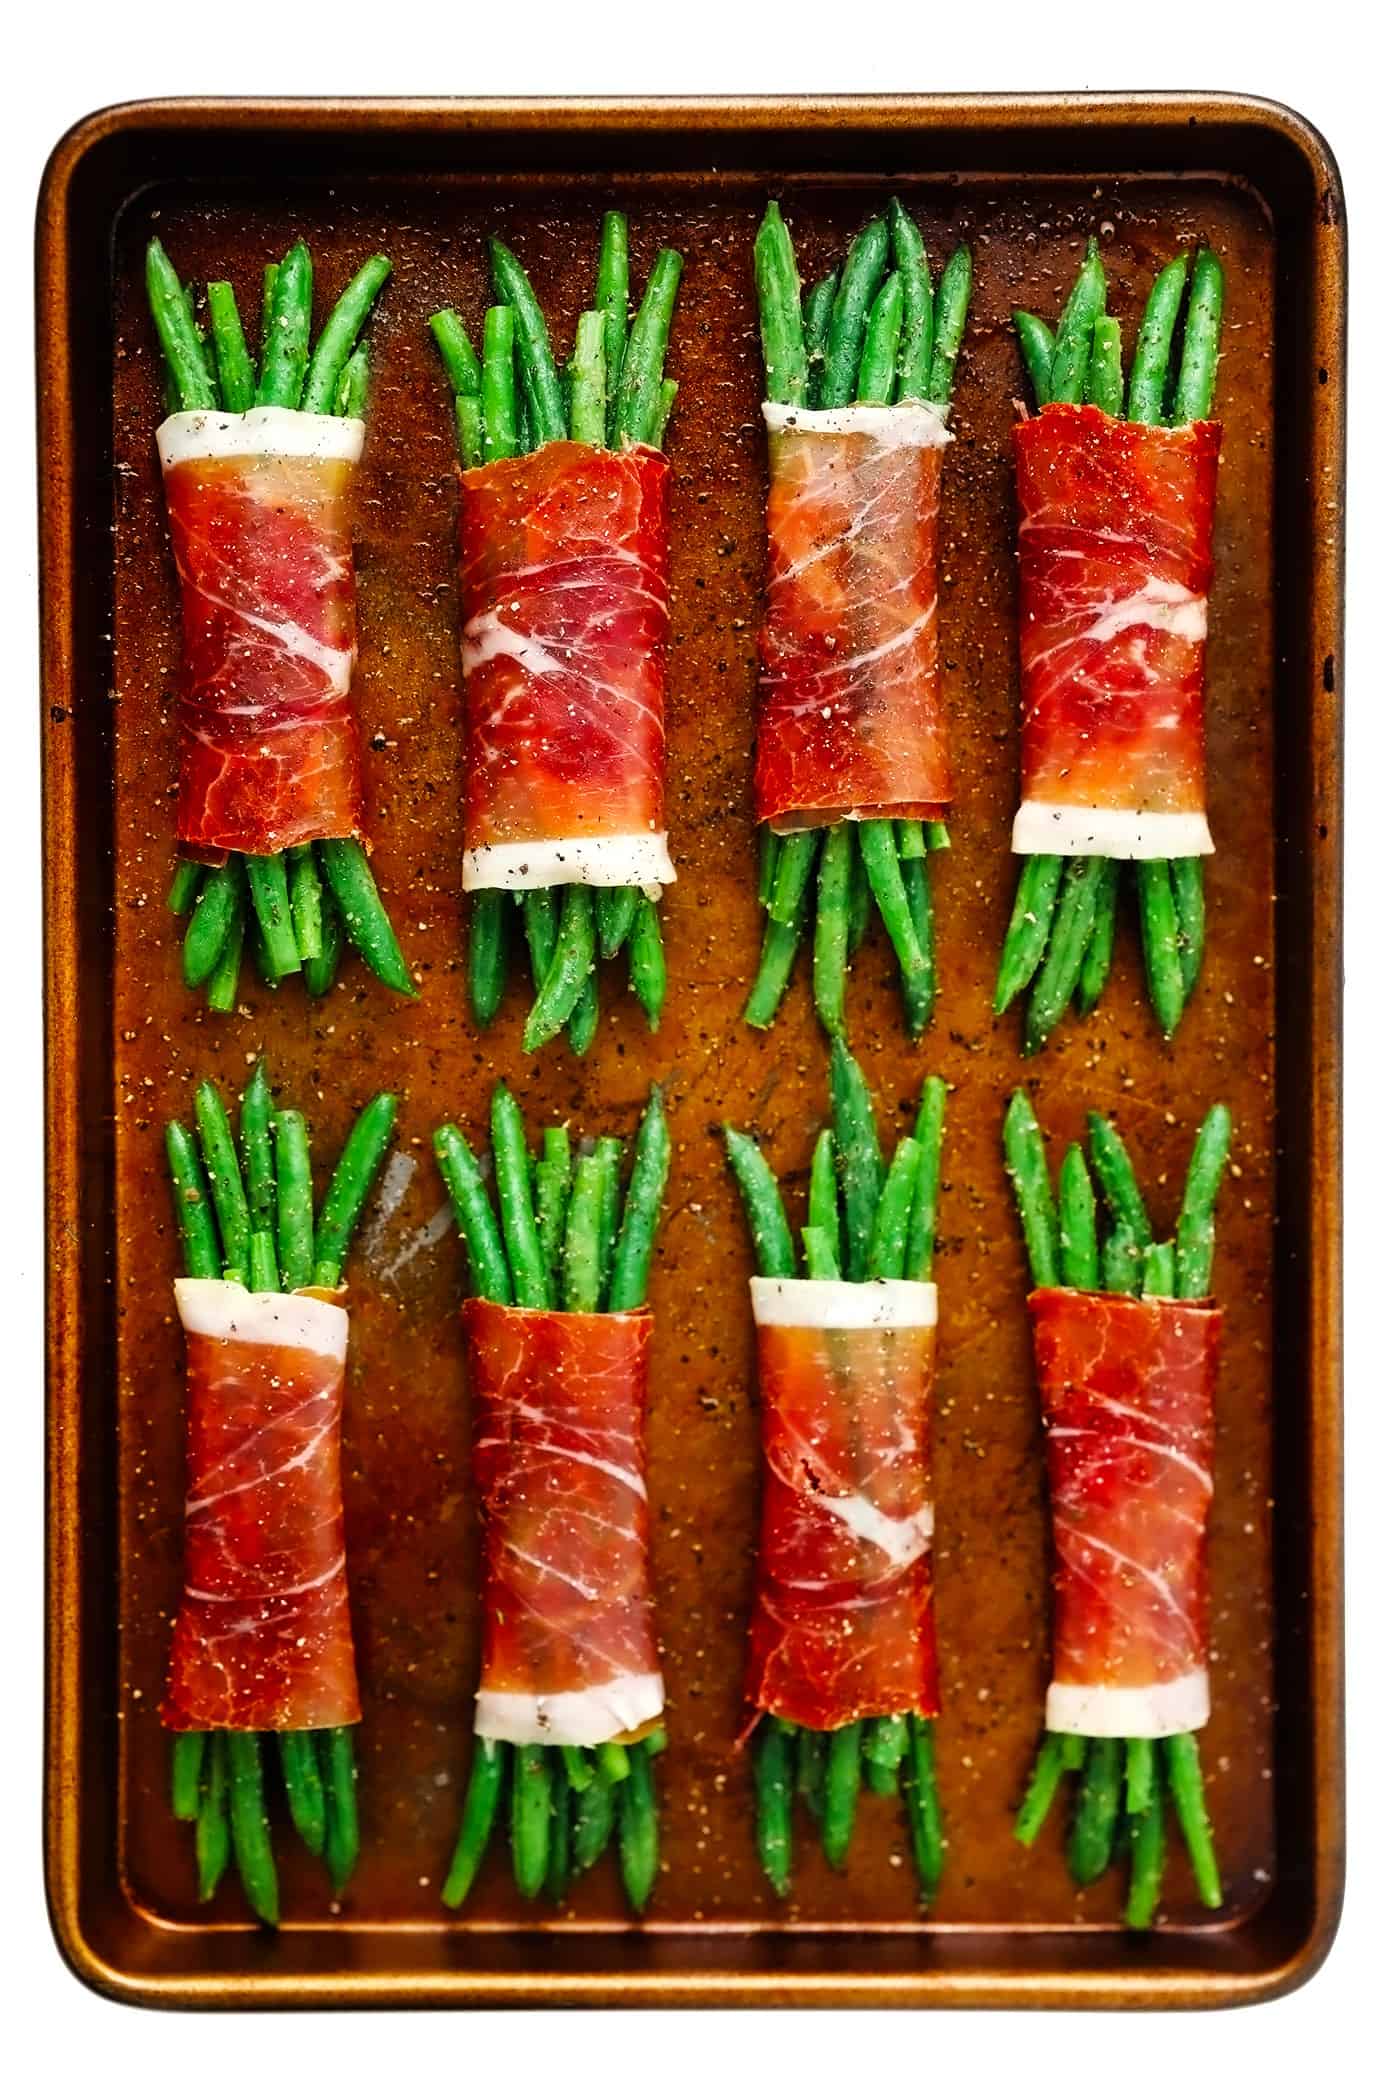 Prosciutto-Wrapped Green Bean Bundles Unbaked